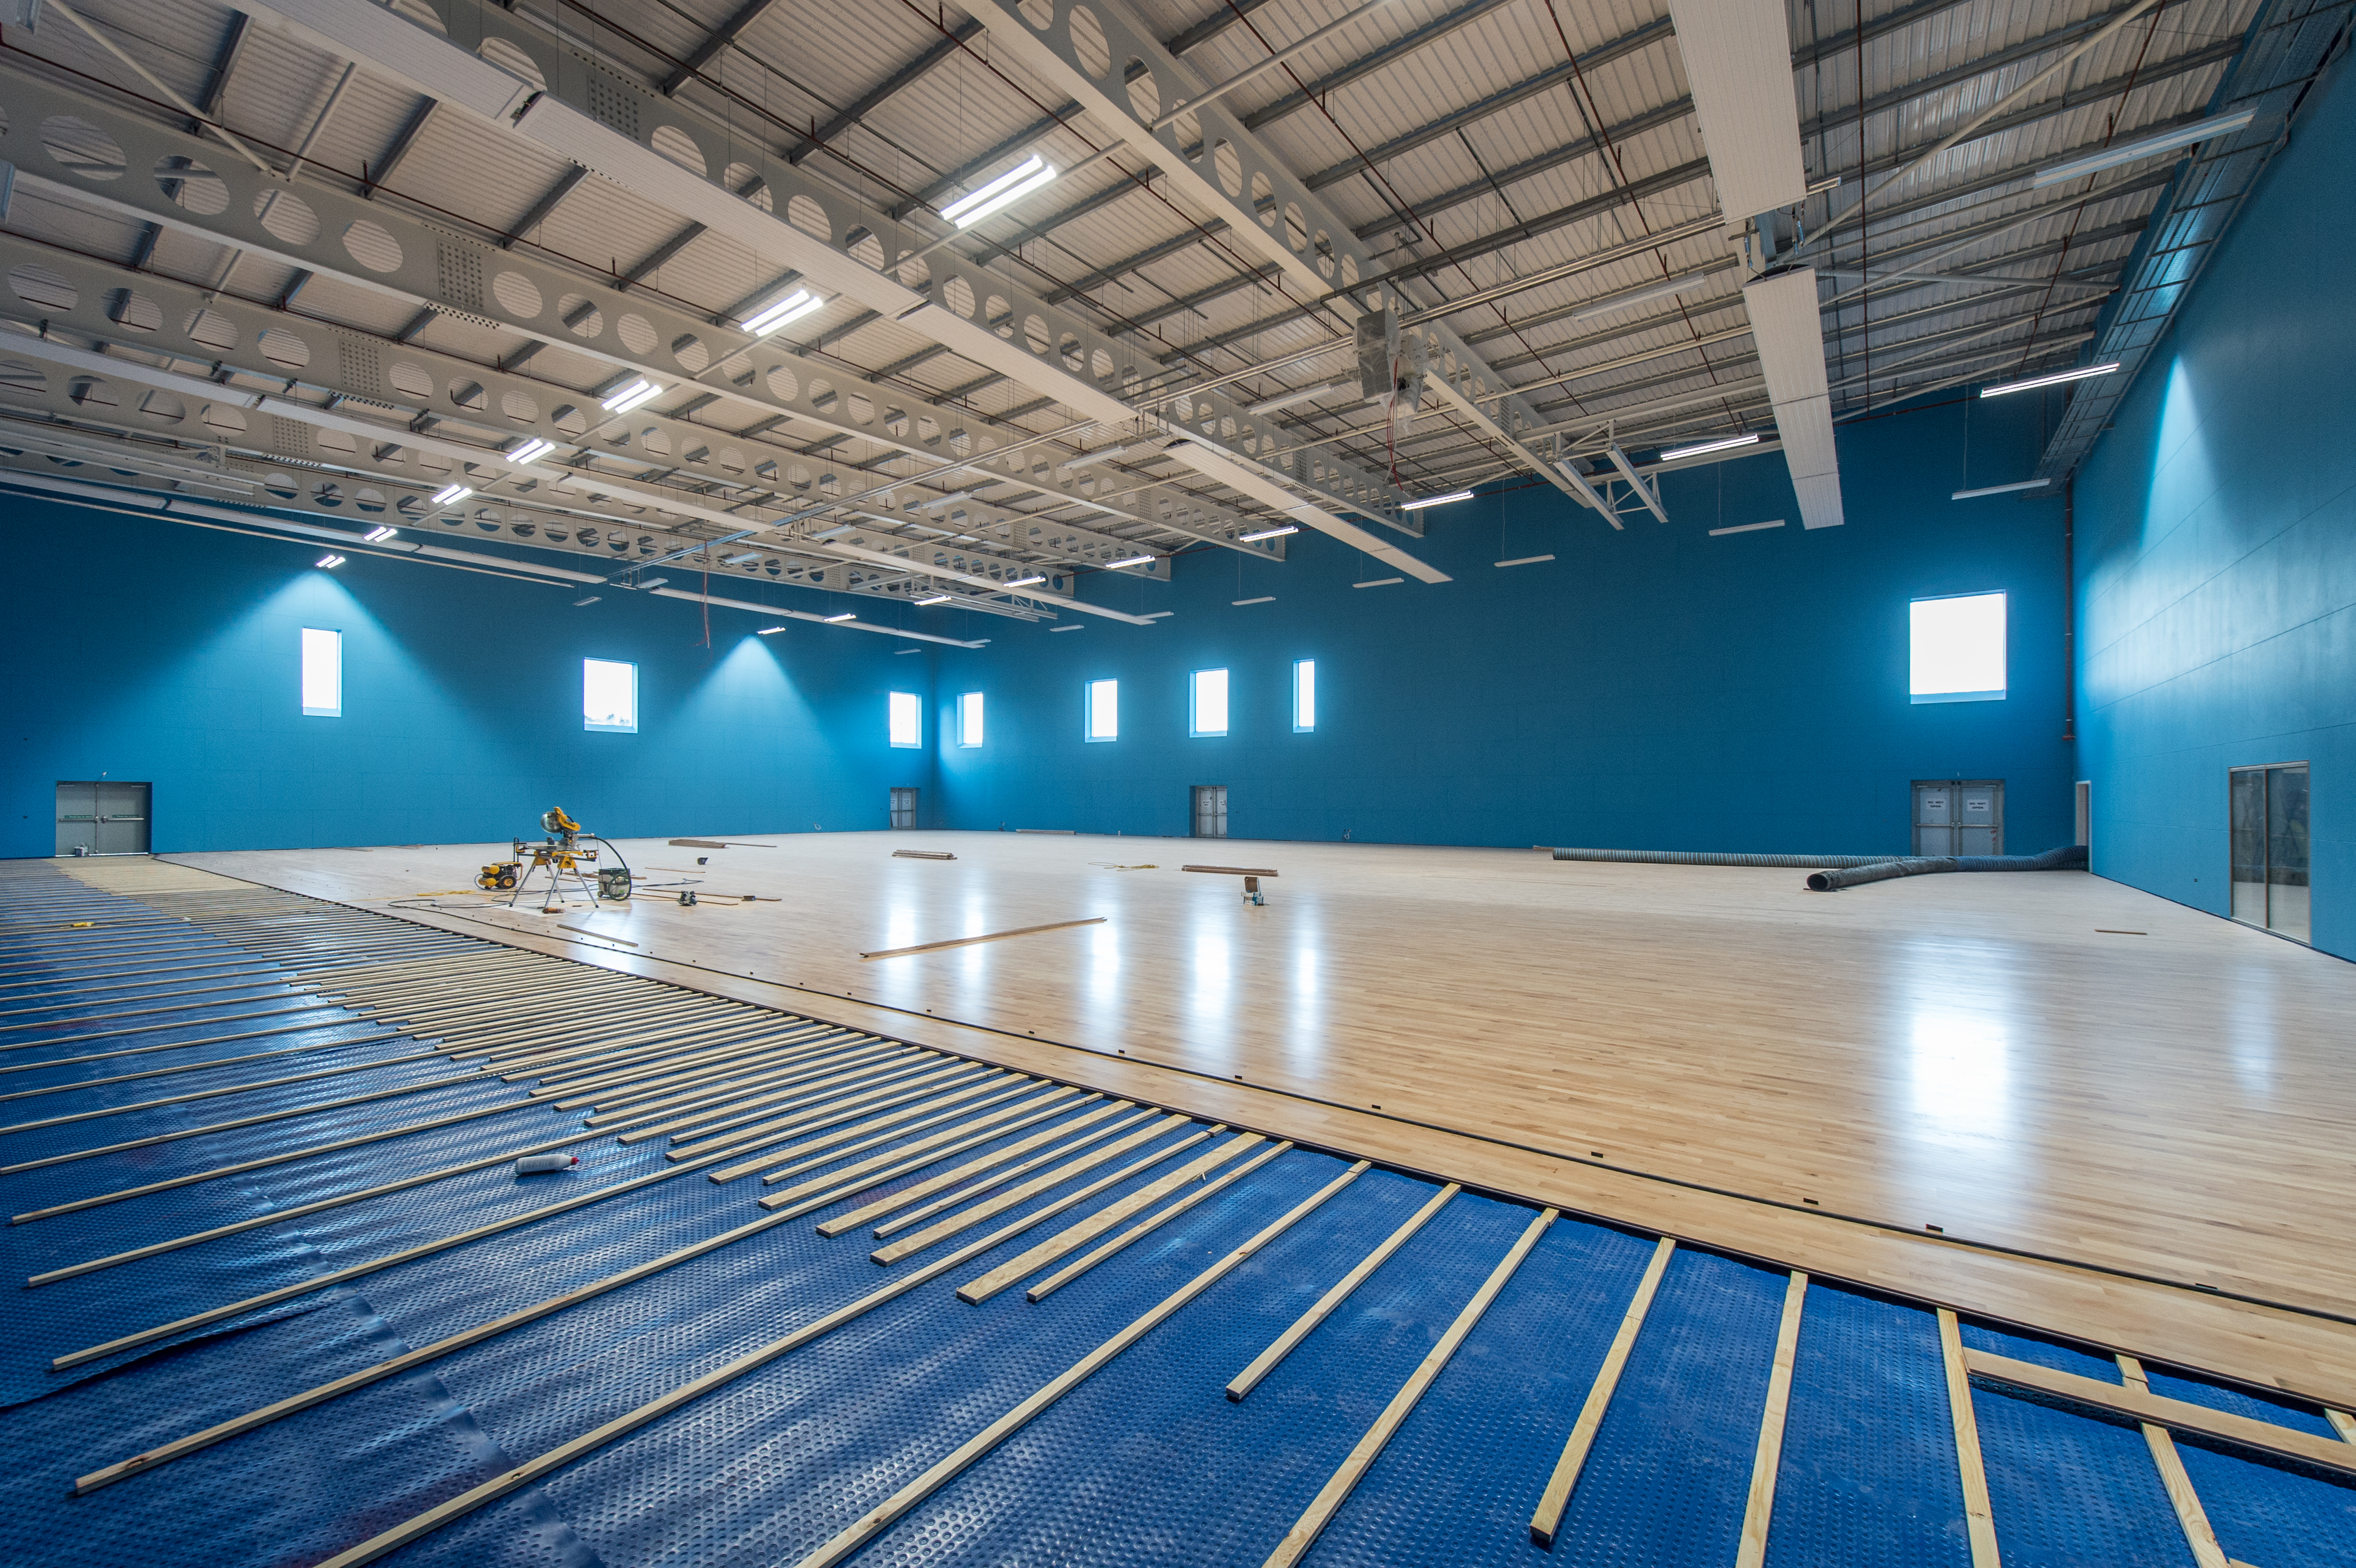 First pictures of Moray Sports Centre in Elgin, Moray.